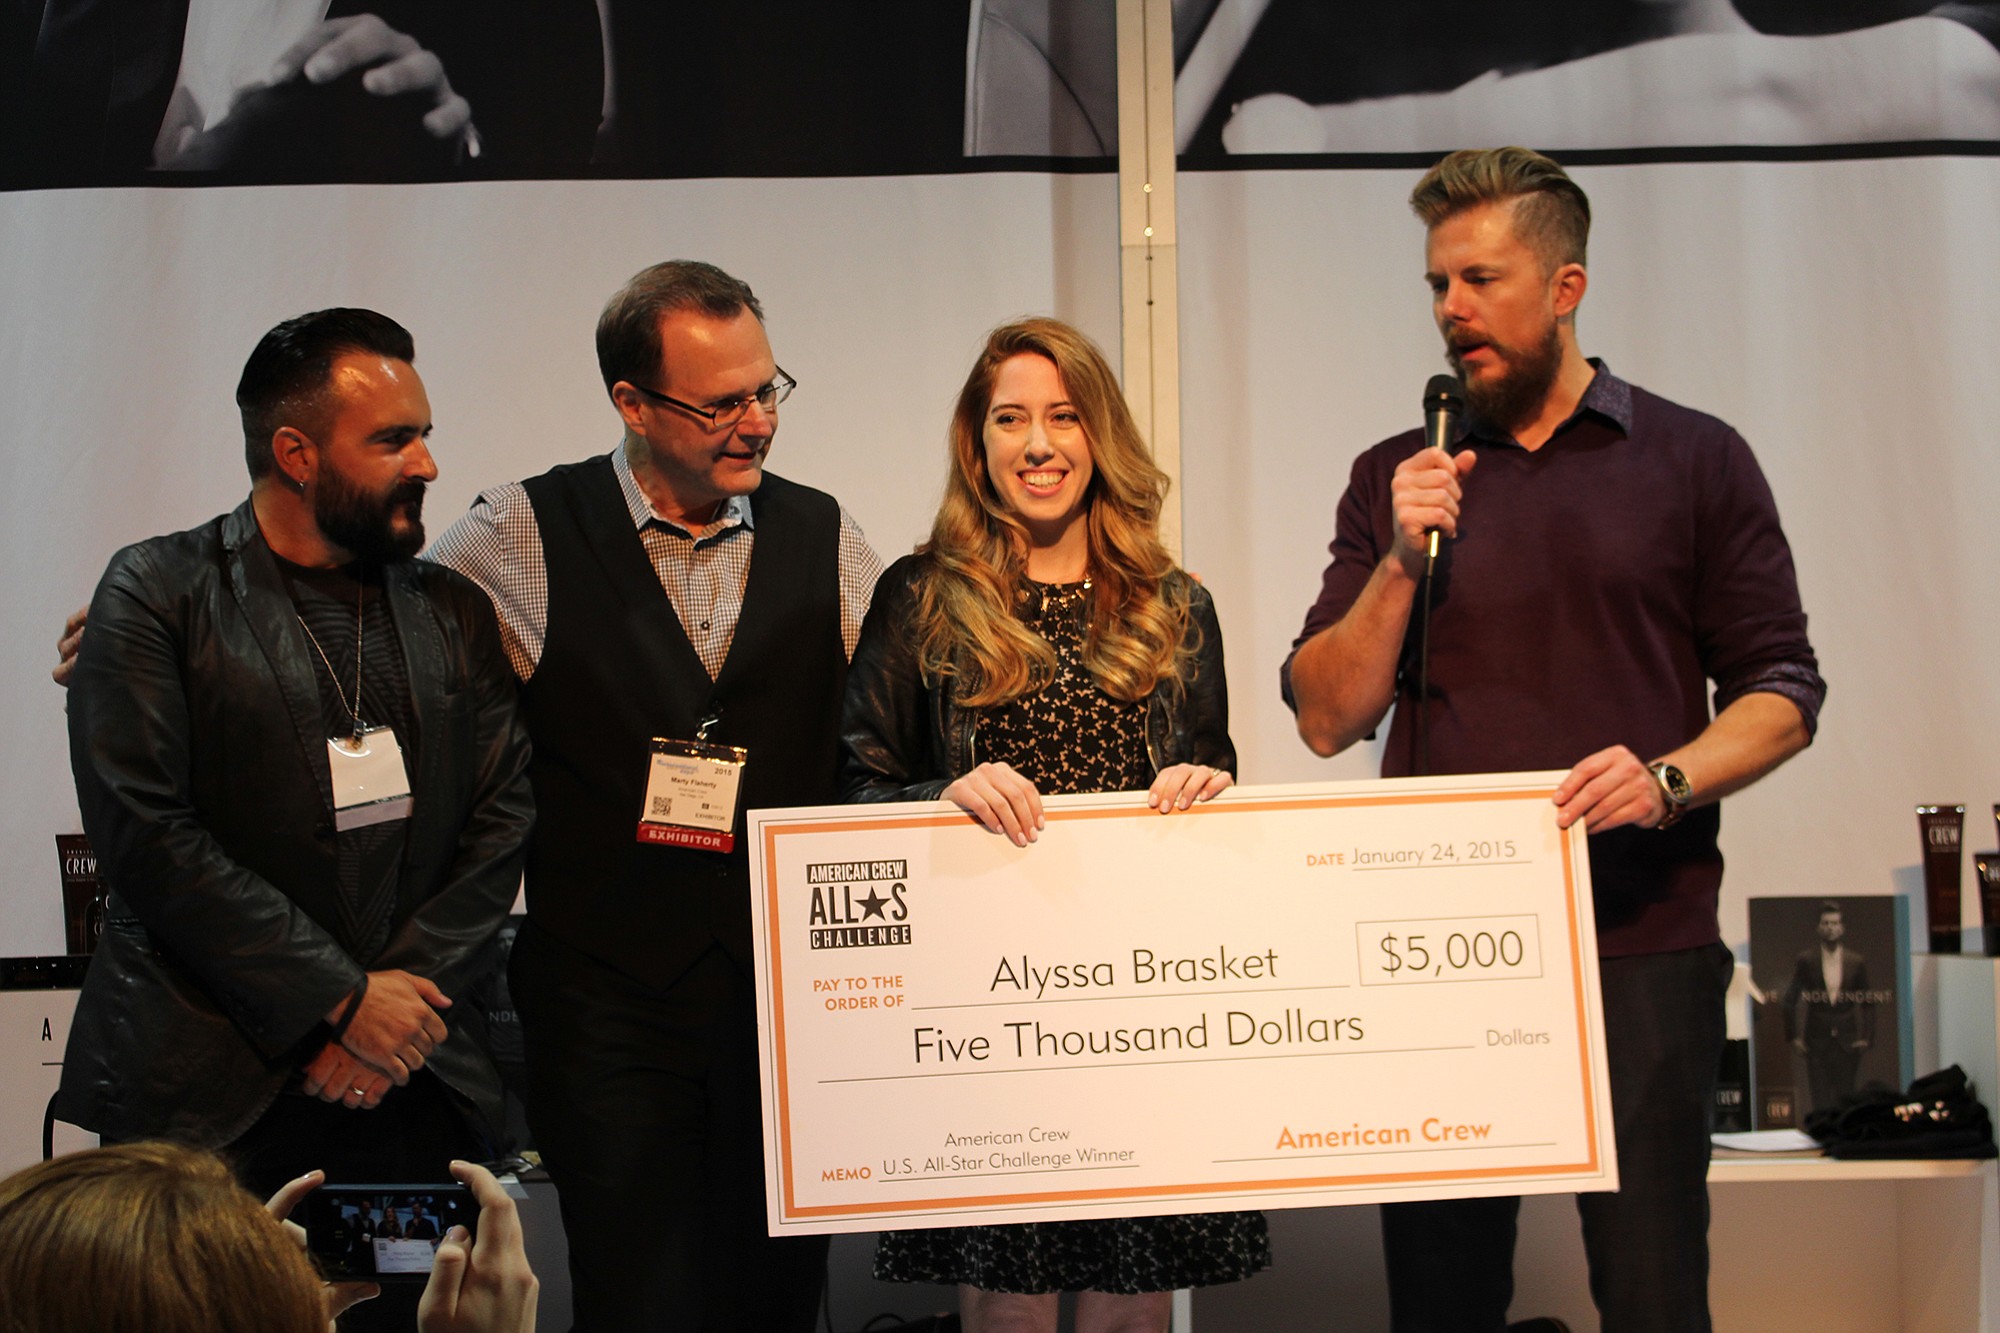 Hairstylist Alyssa Brasket, second from right, of Camas is flanked by Sergi Bancells of Estetica USA, from left, Martin Flaherty of Revlon Professional Brands and Kevin Grieve of American Crew as she receives an award after winning the American Crew U.S. All-Star Challenge on Jan. 25 in Long Beach, Calif.